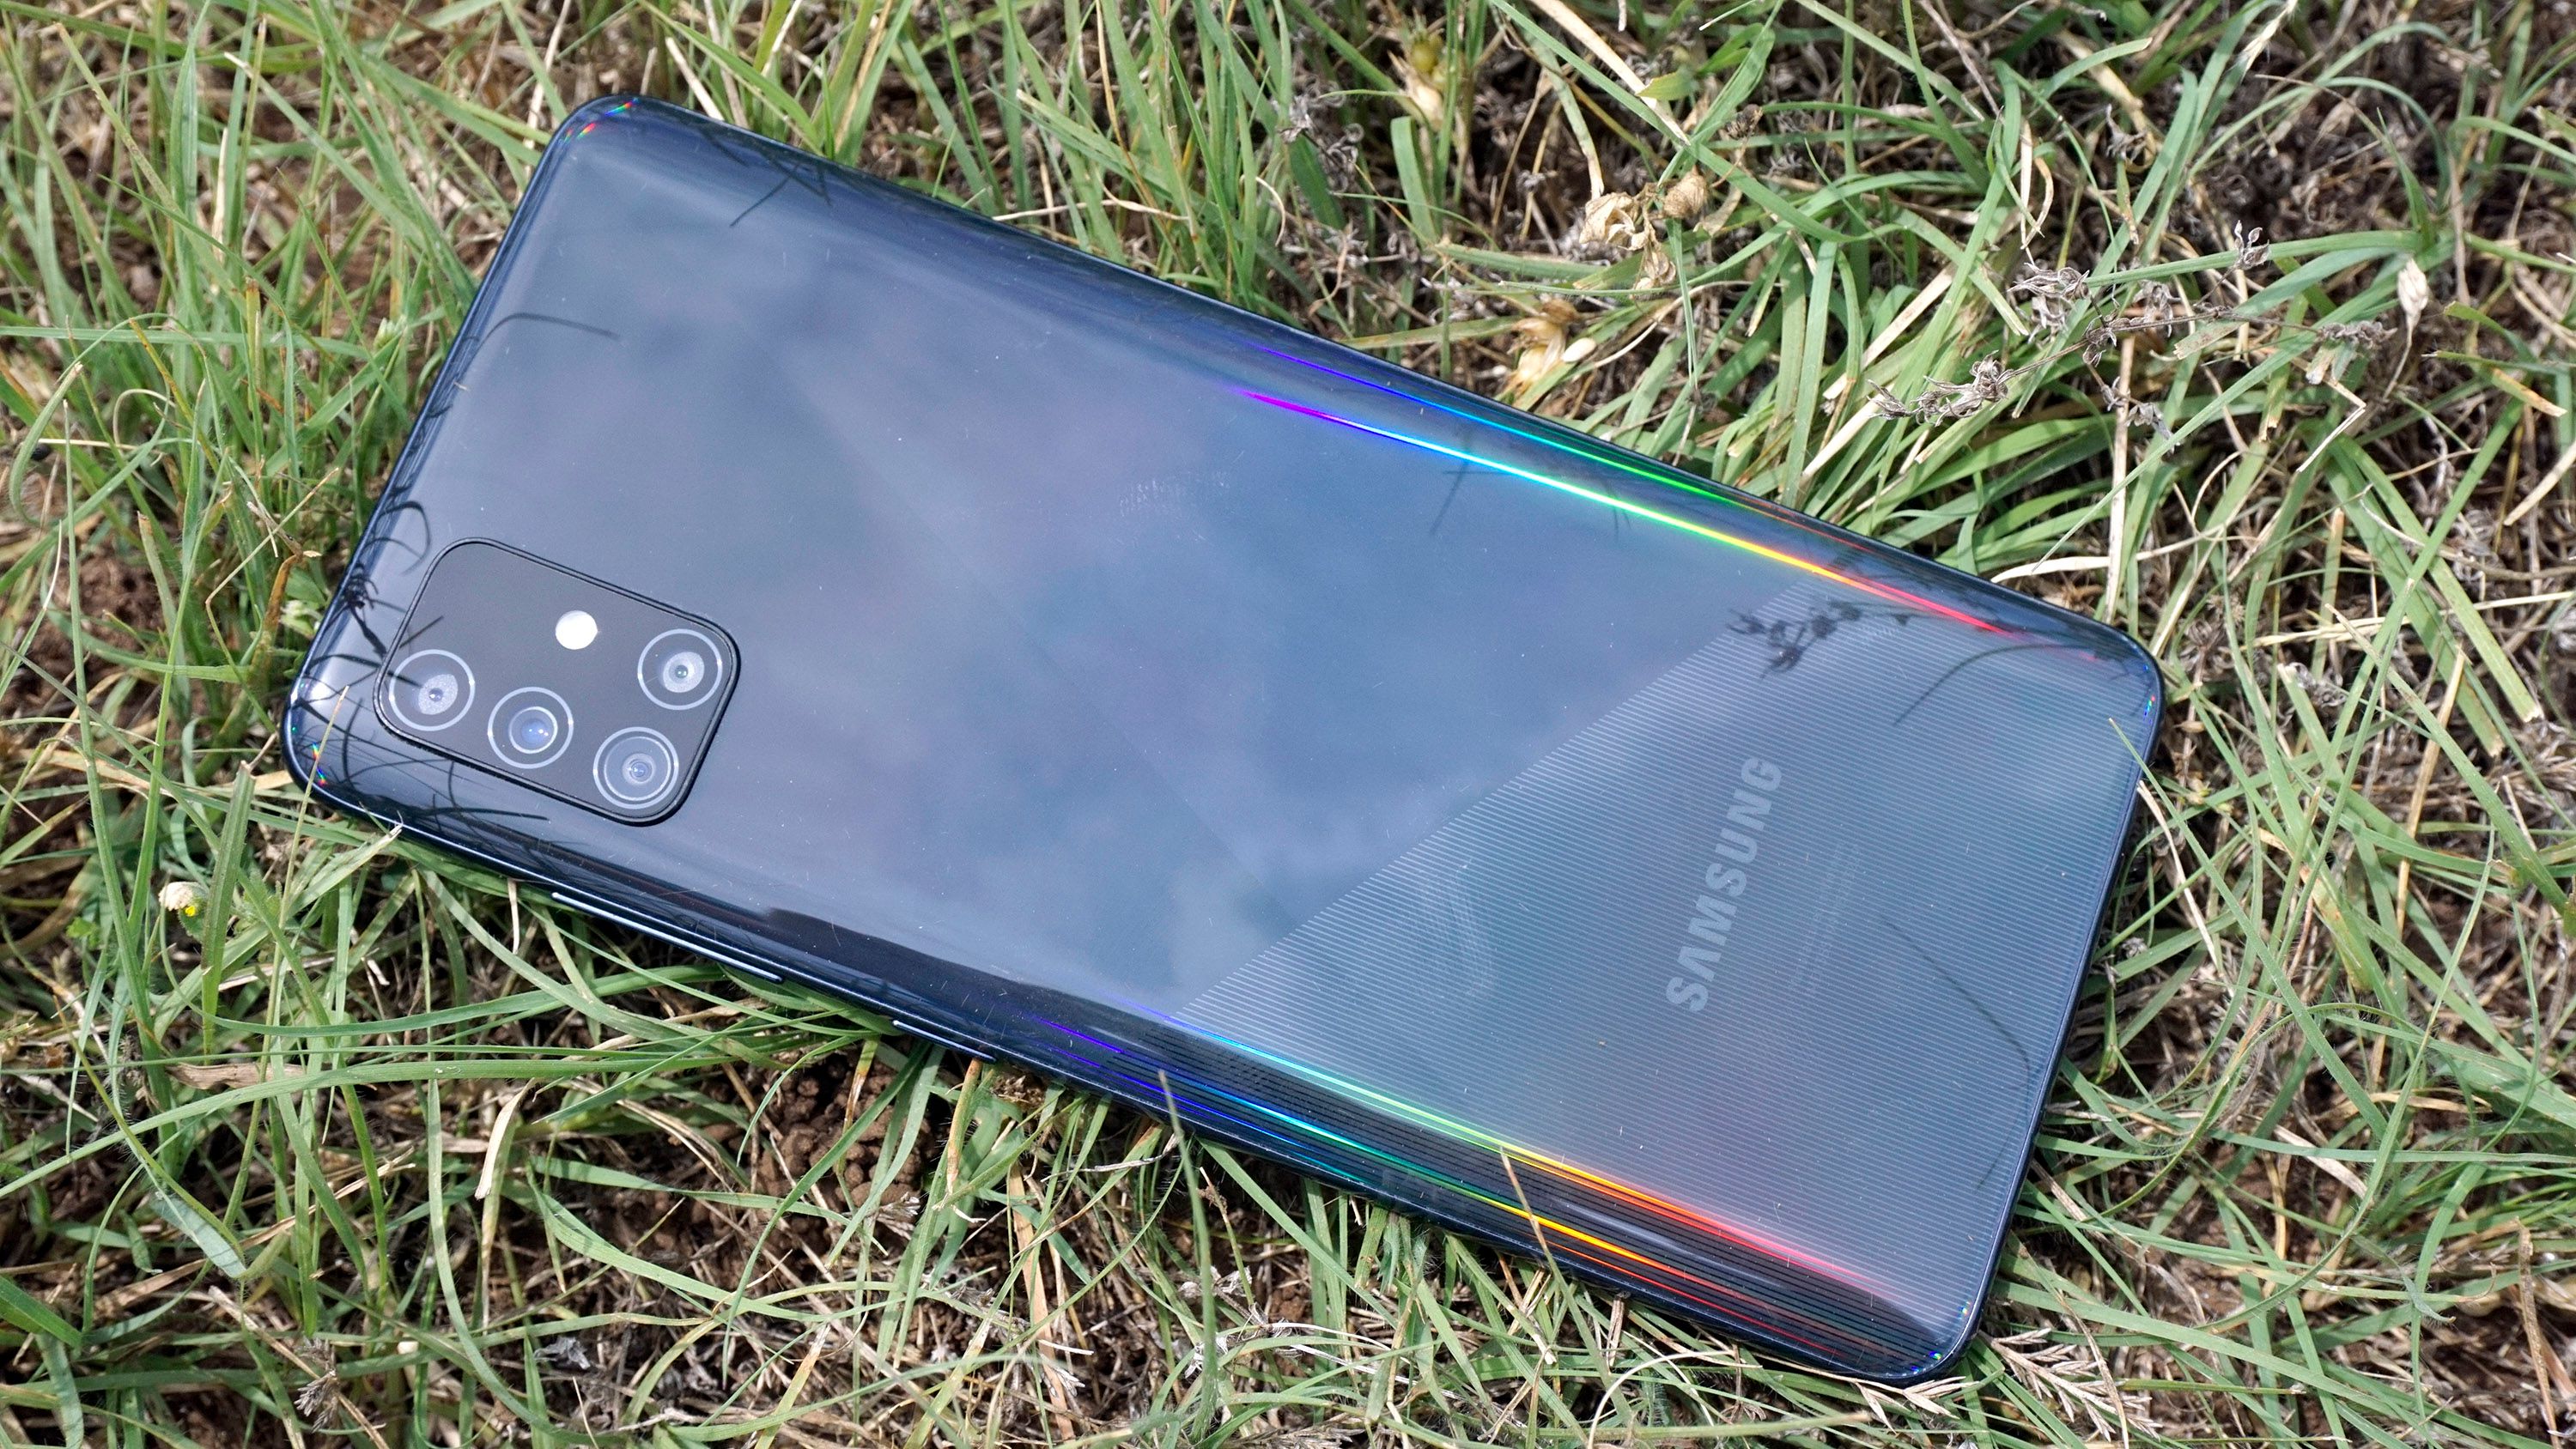 Galaxy A51 from the rear